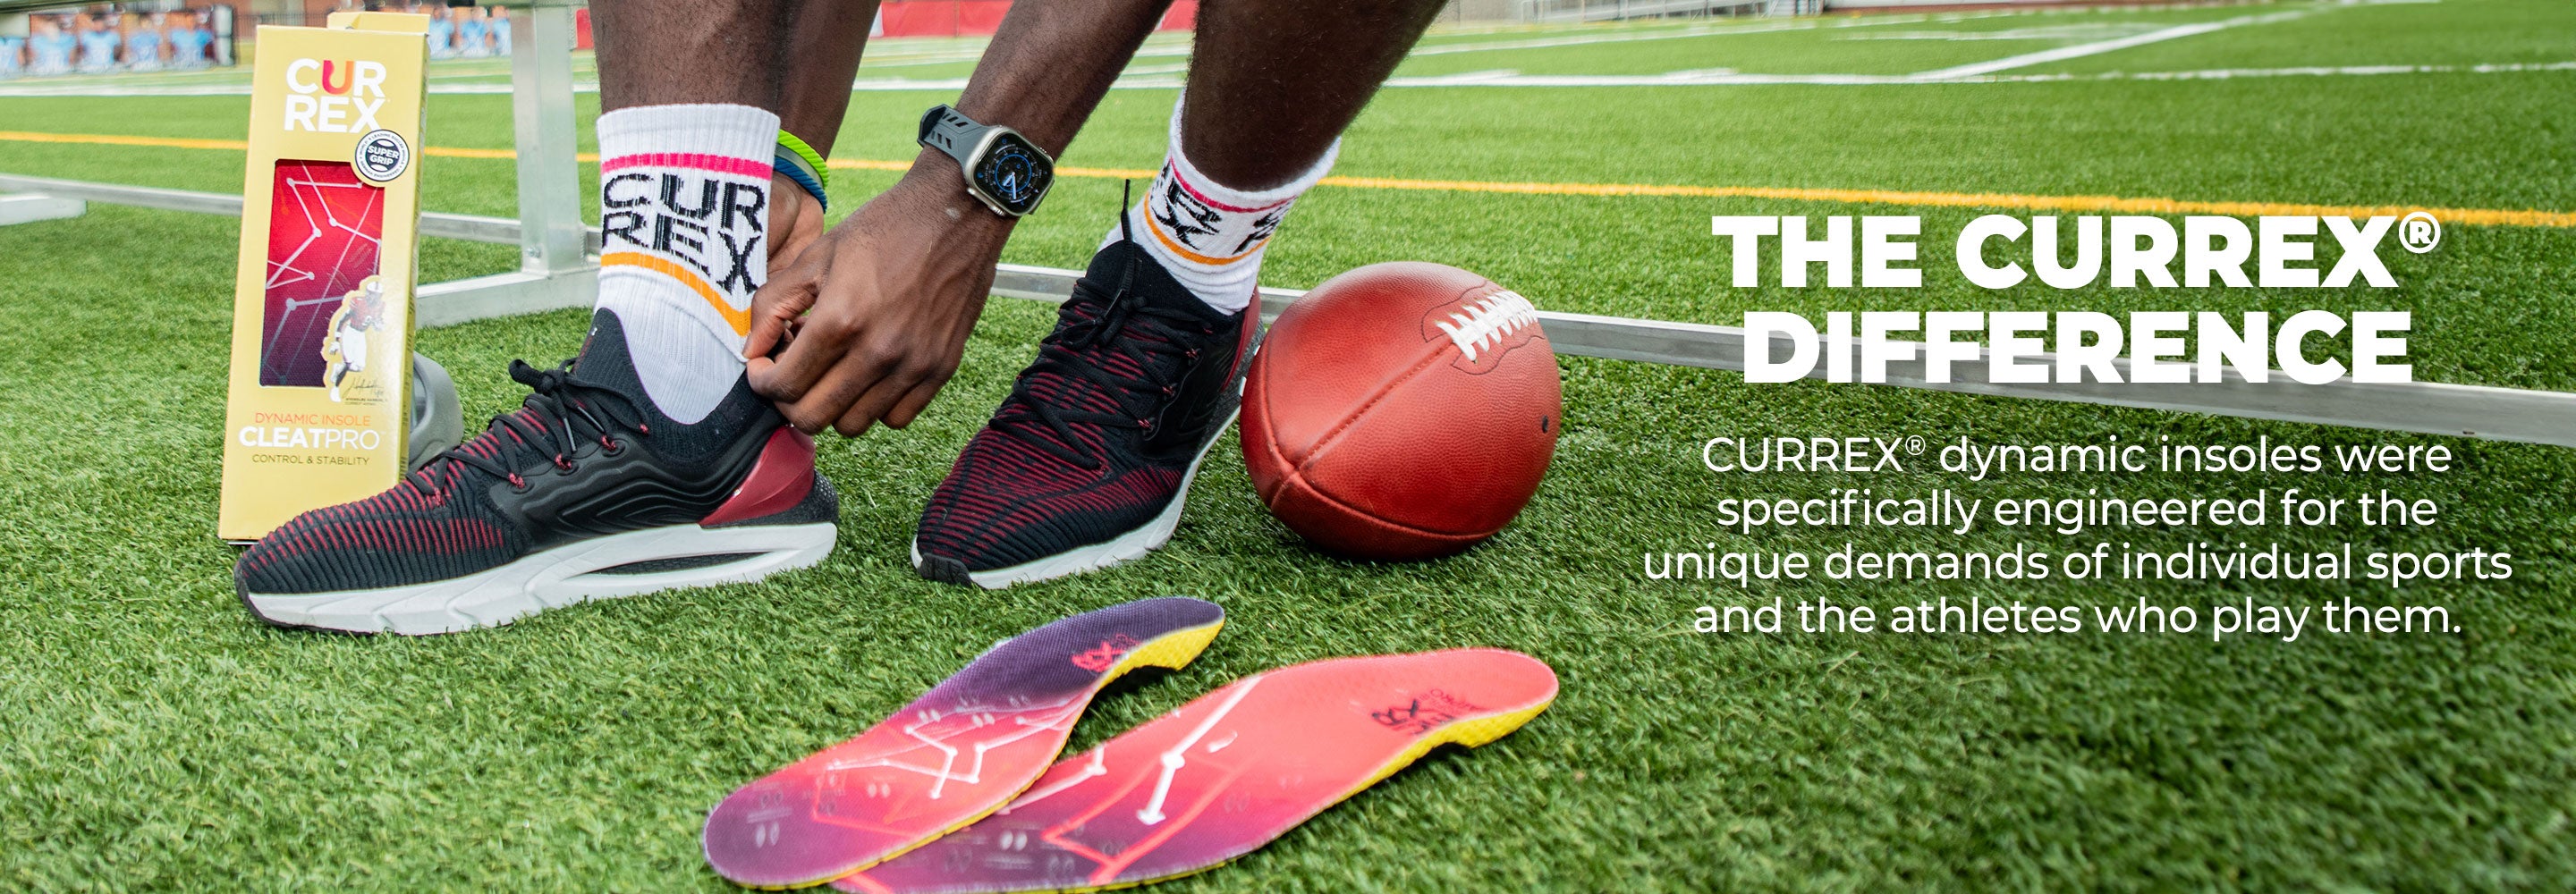 Nyck Harbor wearing CURREX socks, sitting on bench in field with football and CURREX CLEATPRO insoles. The CURREX® Difference: CURREX® dynamic insoles were specifically engineered for the unique demands of individual sports and the athletes who play them.